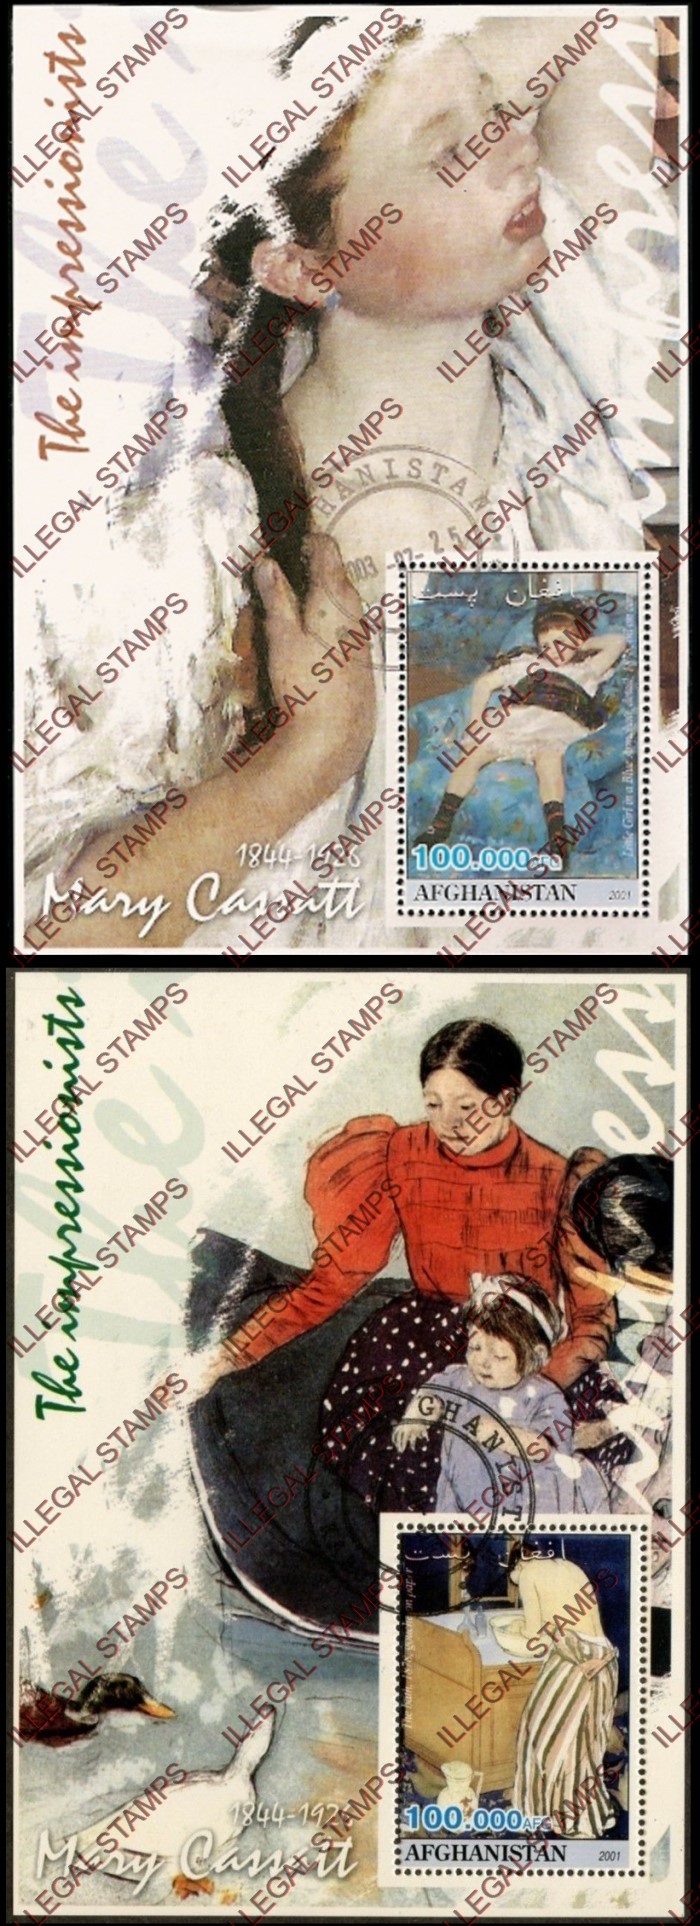 Afghanistan 2001 Impressionists Mary Cassatt Illegal Stamp Souvenir Sheets of One